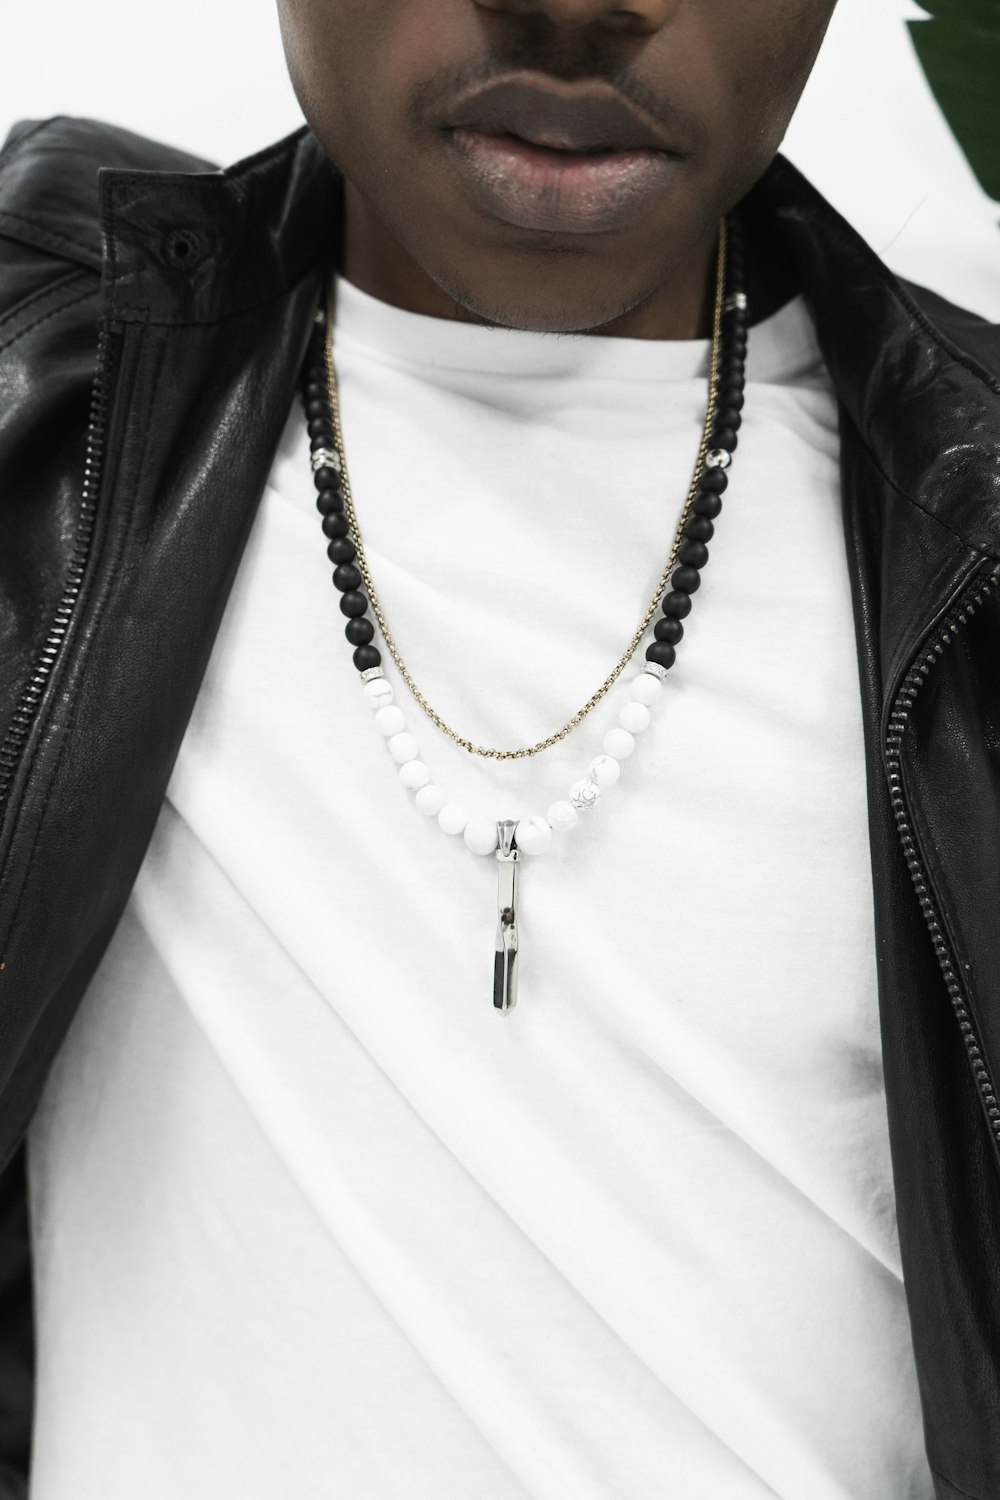 man wearing black and silver necklace